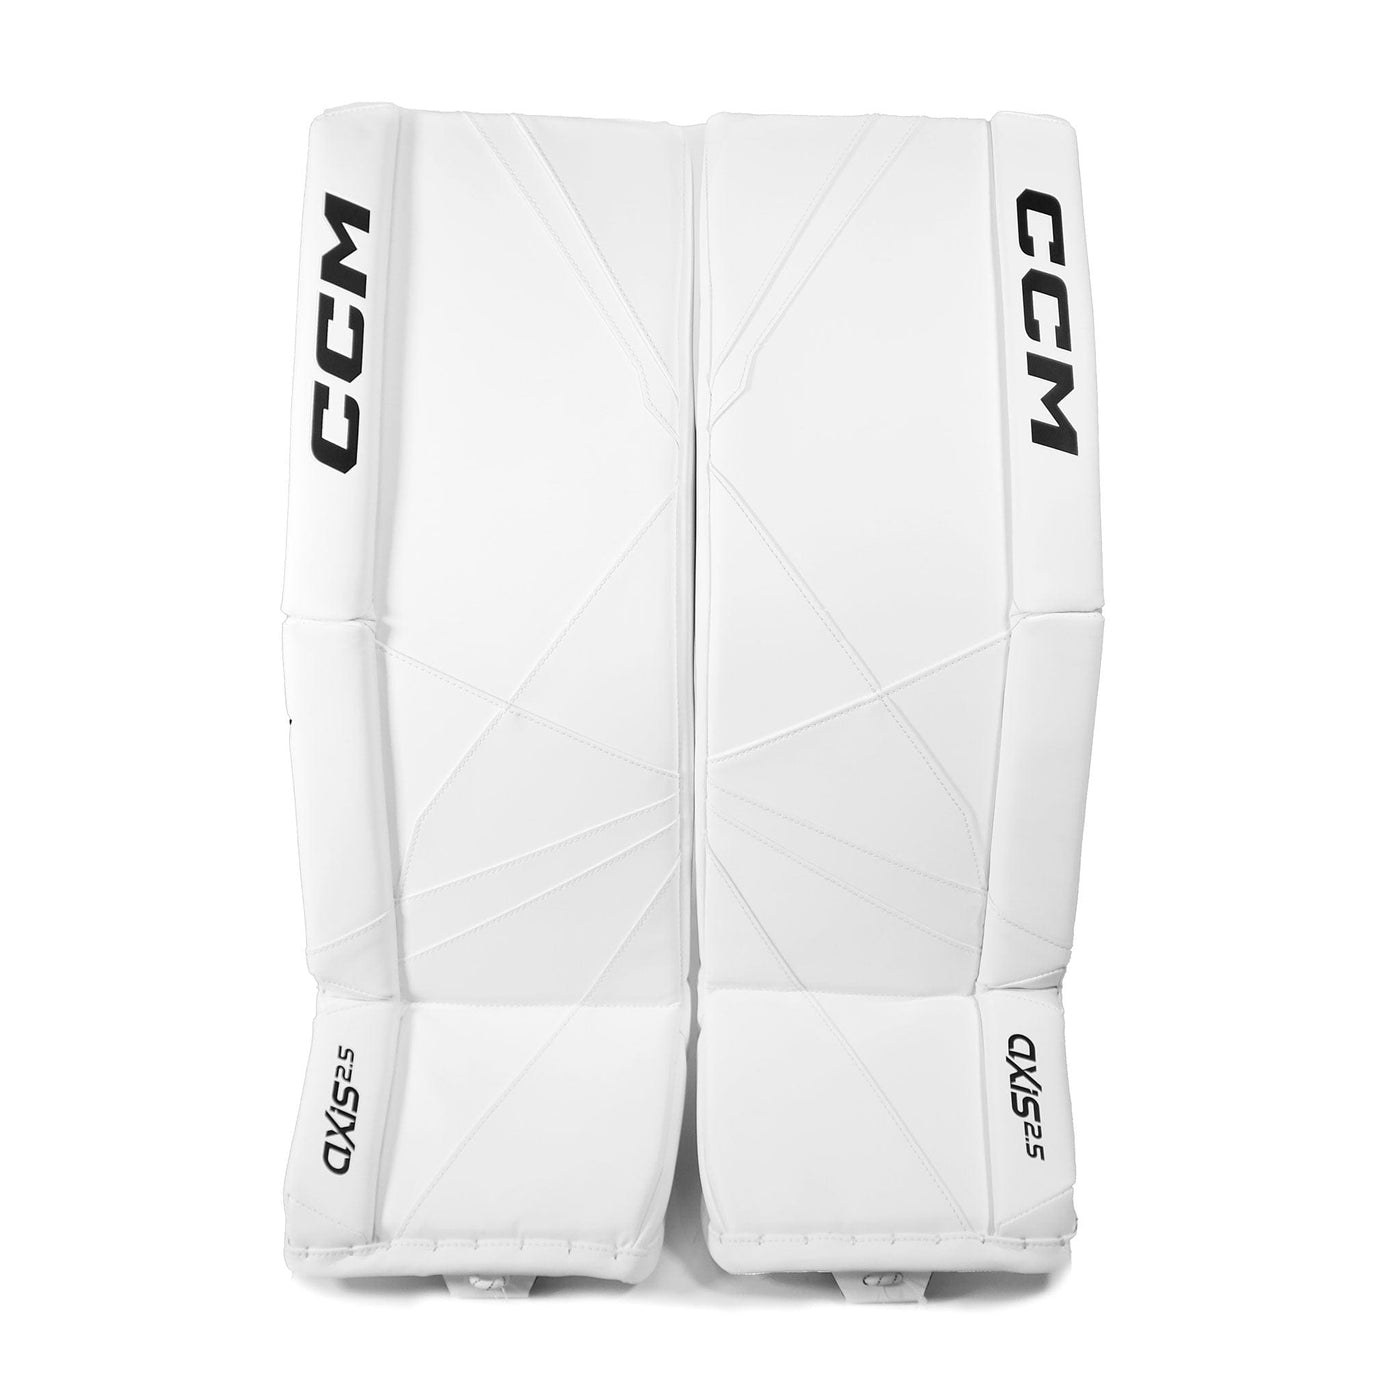 CCM Axis 2.5 Junior Goalie Leg Pads - Source Exclusive - The Hockey Shop Source For Sports